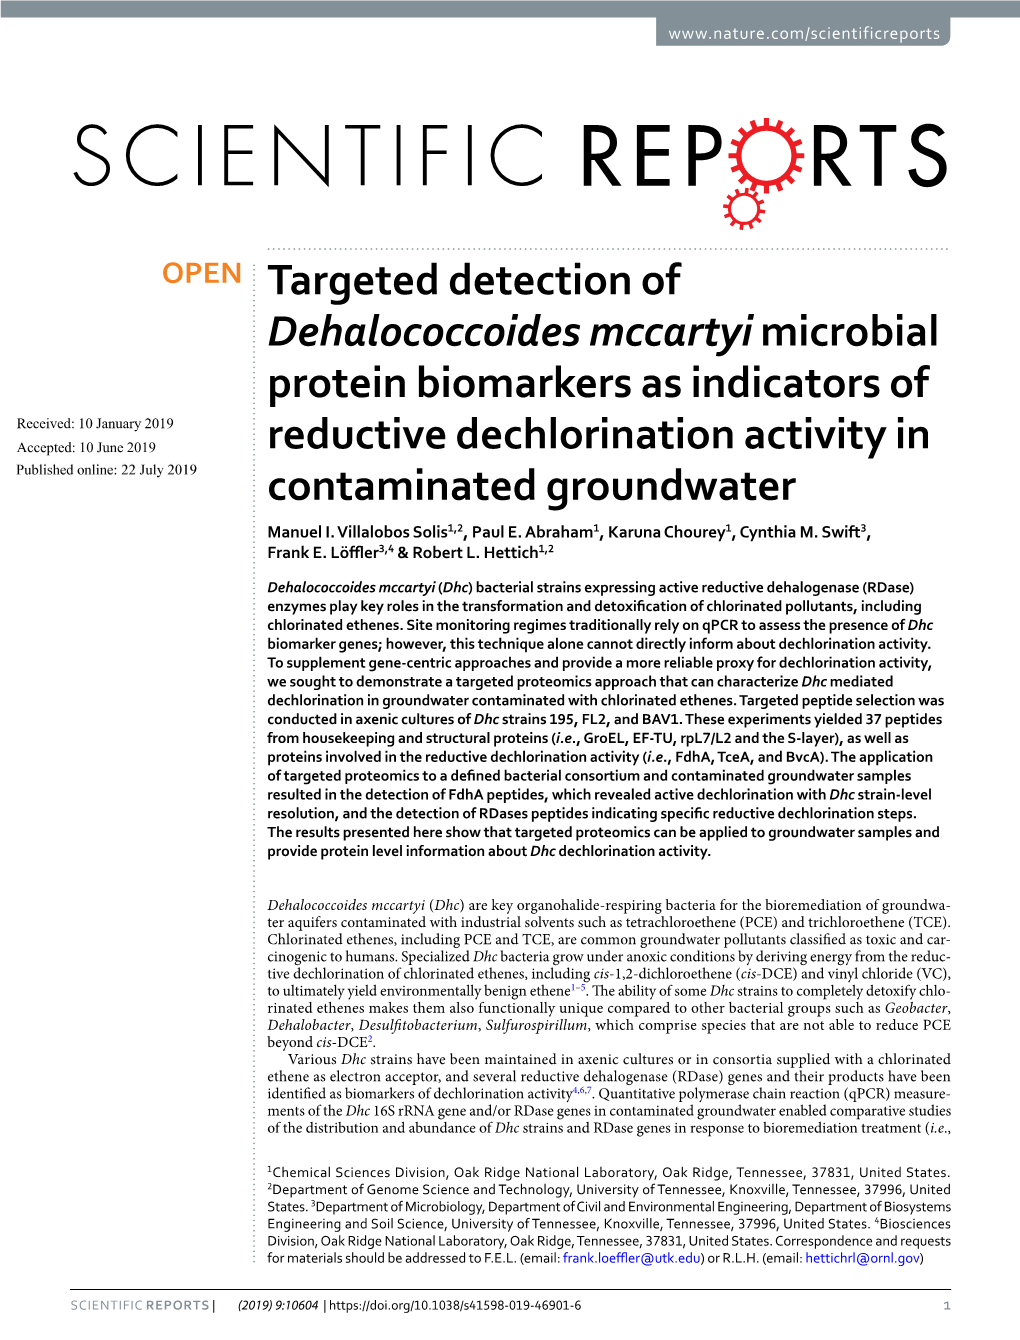 Targeted Detection of Dehalococcoides Mccartyi